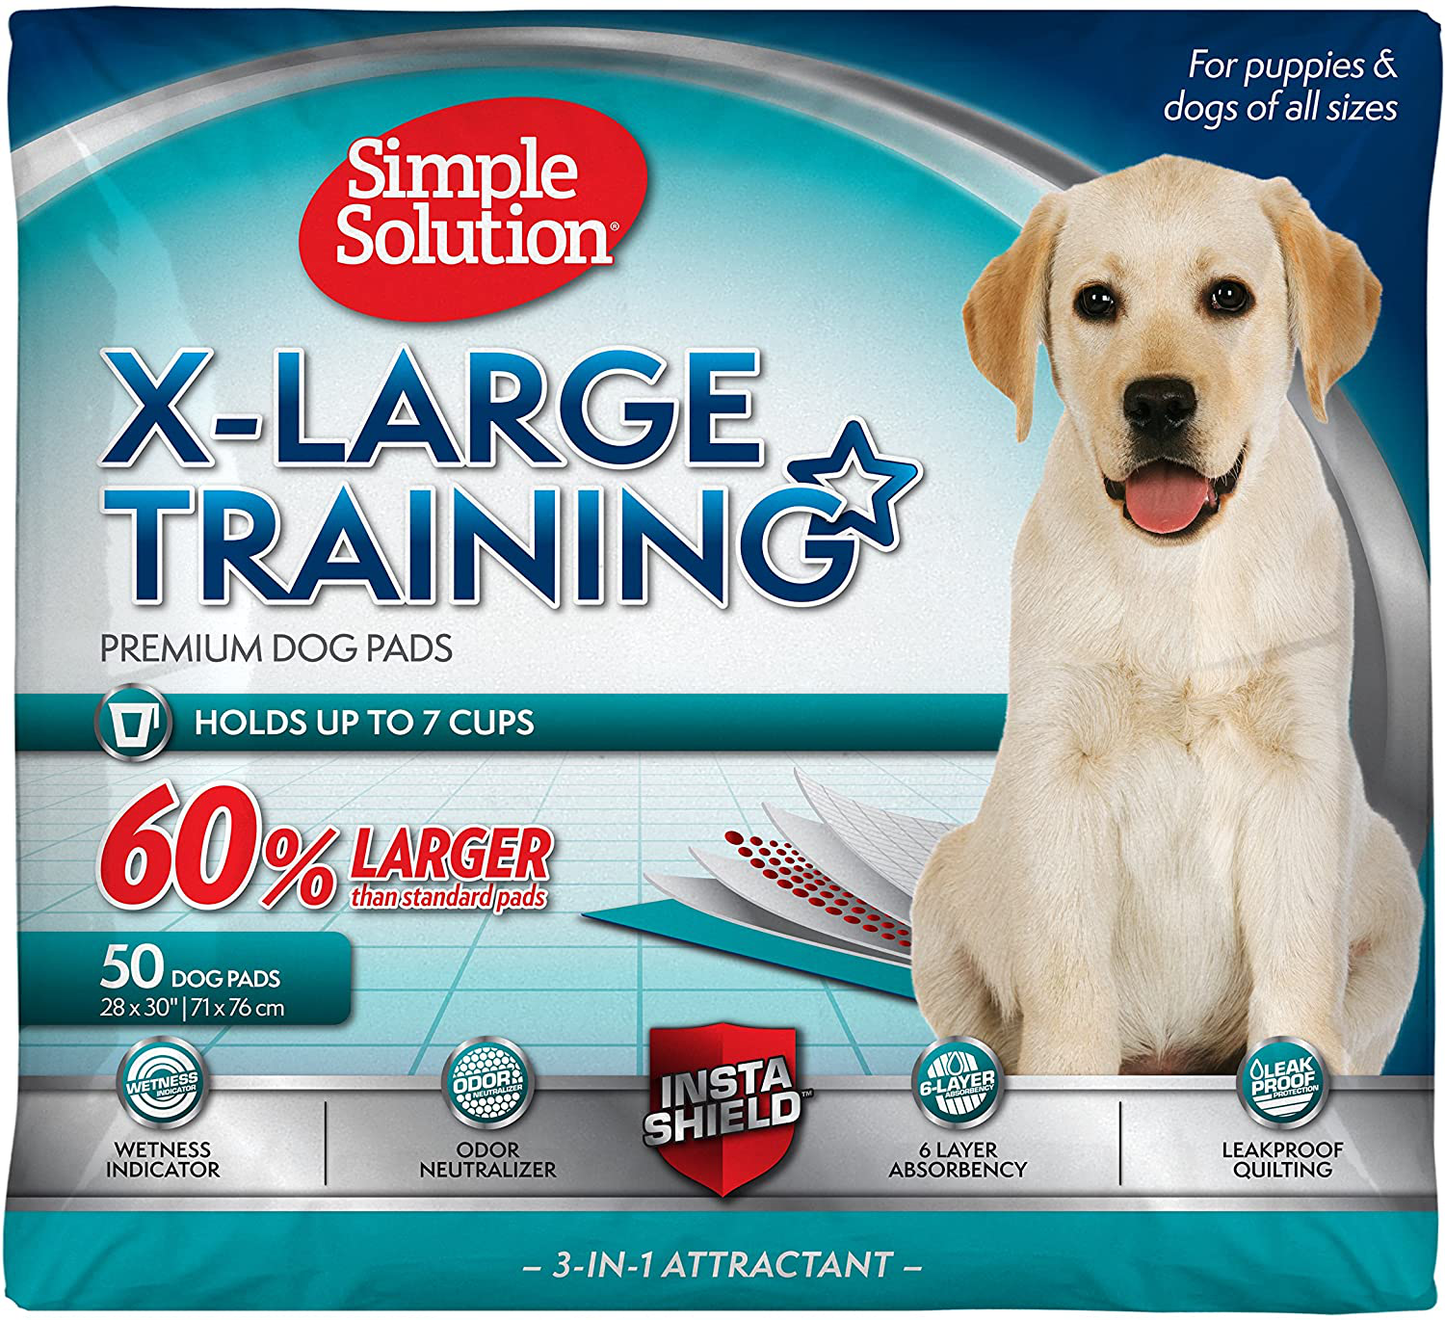 Simple Solution Training Puppy Pads | Extra Large, 6 Layer Dog Pee Pads, Absorbs up to 7 Cups of Liquid | 28X30 Inches